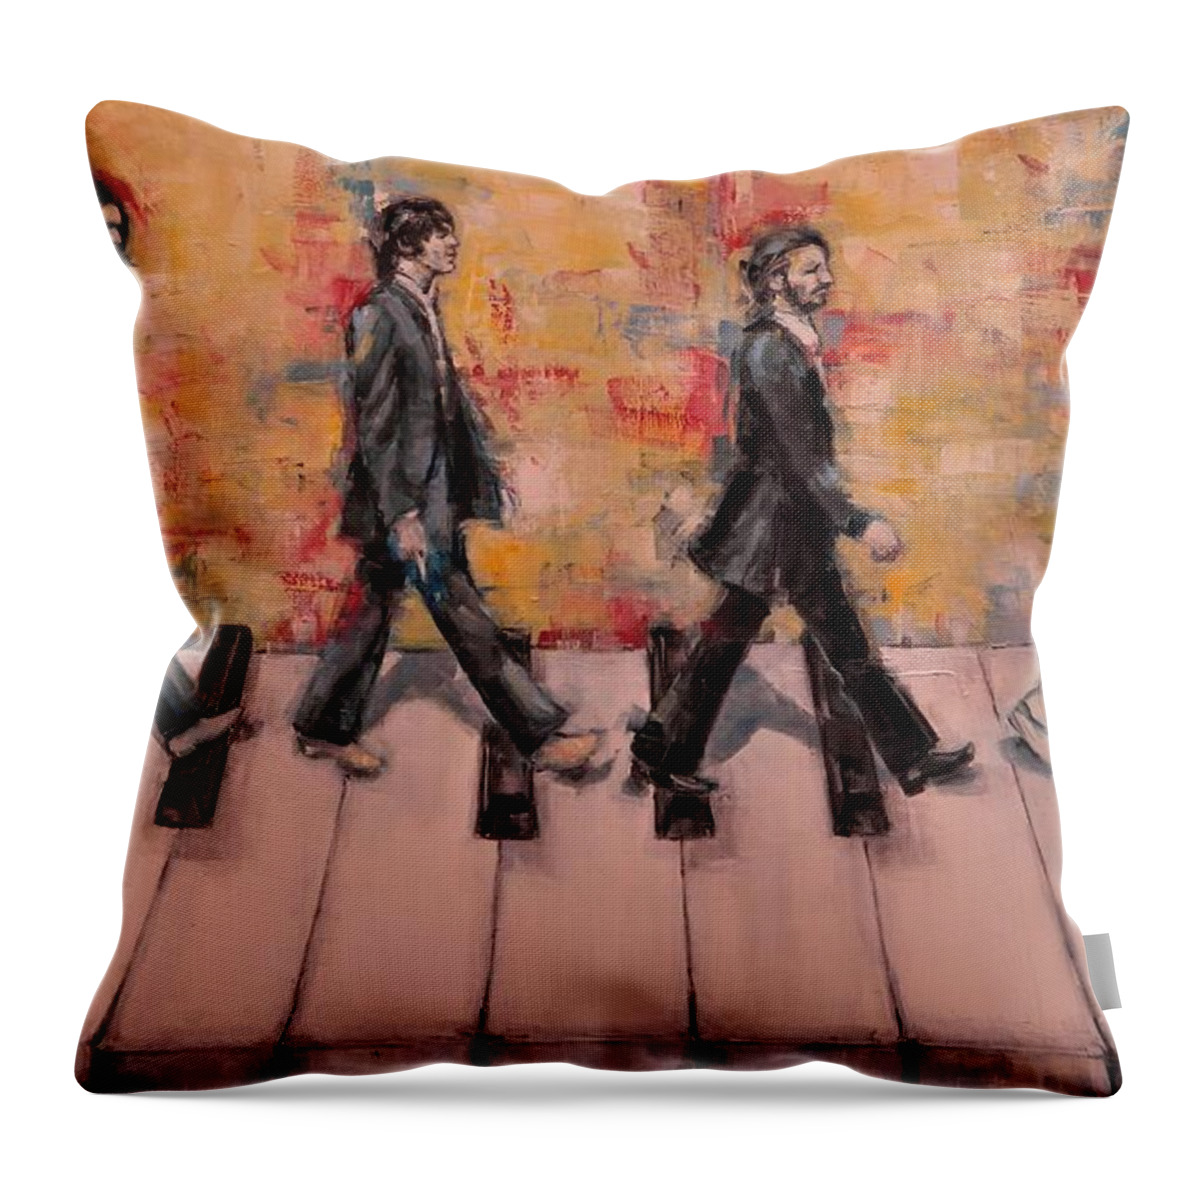 Beatles Throw Pillow featuring the painting The Keys On Abbey Road by Dan Campbell